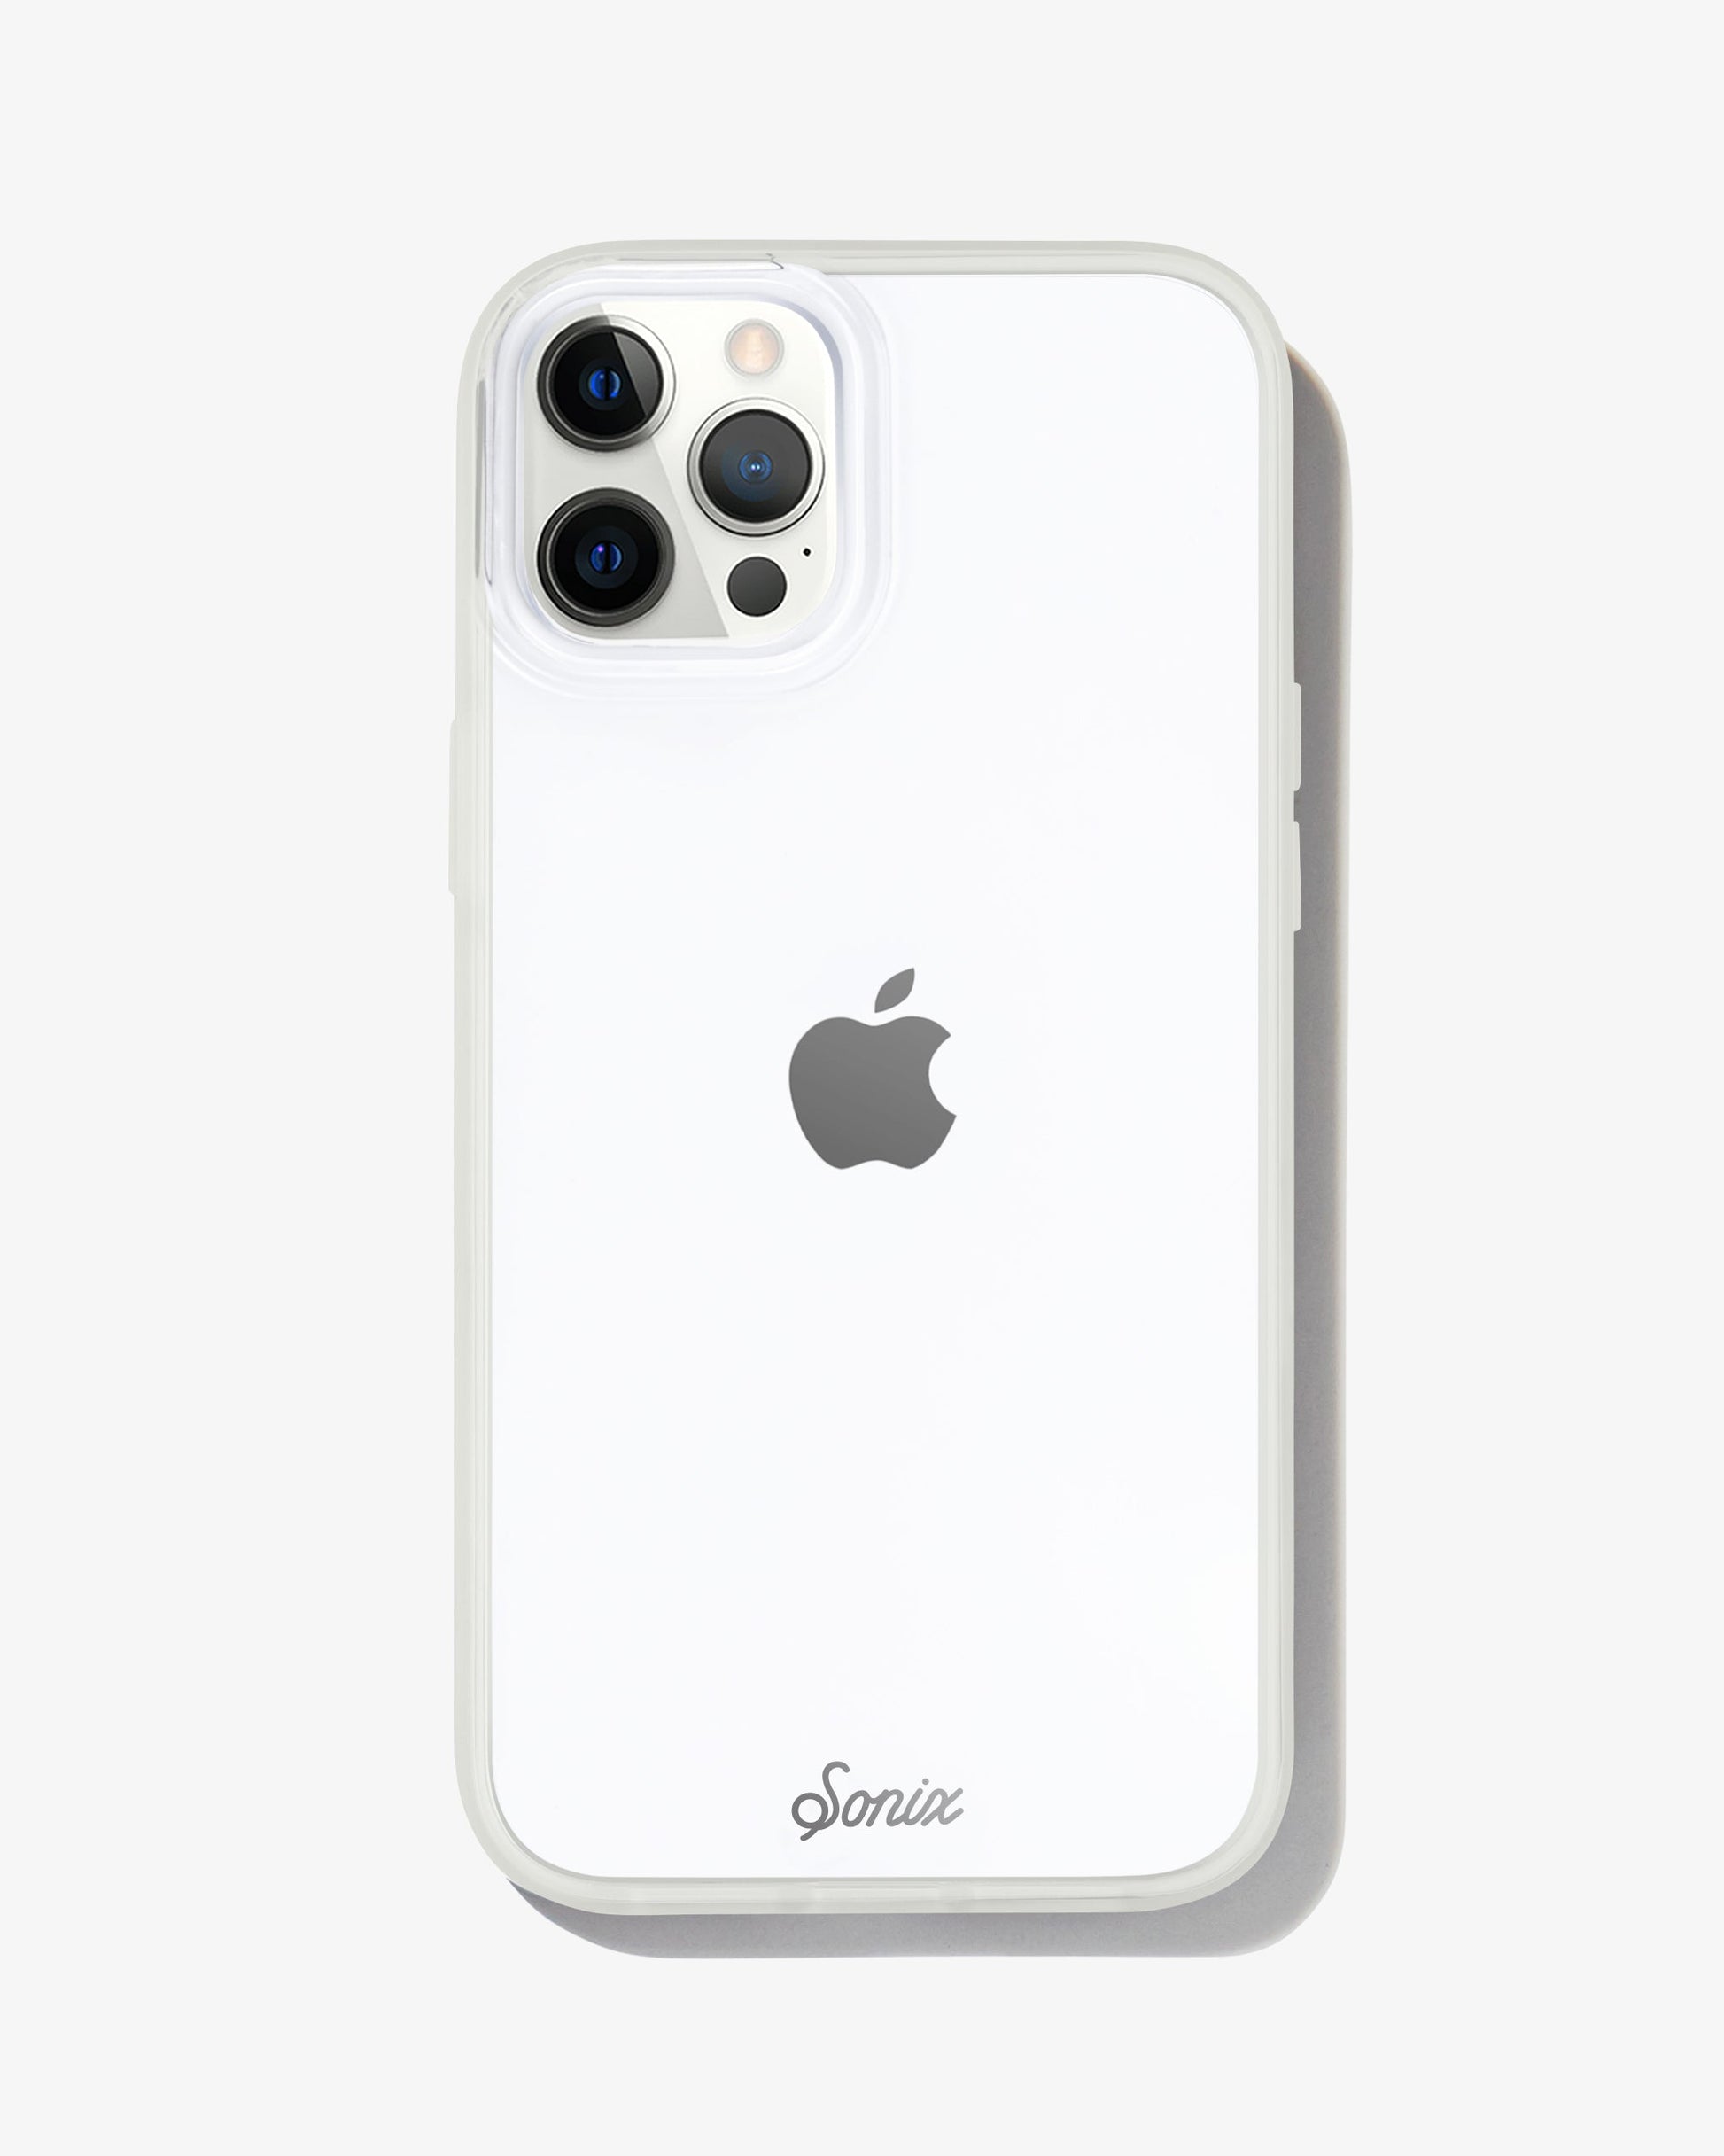 a clear case featuring a glow-in-the-dark bumper shown on an iphone 12 pro